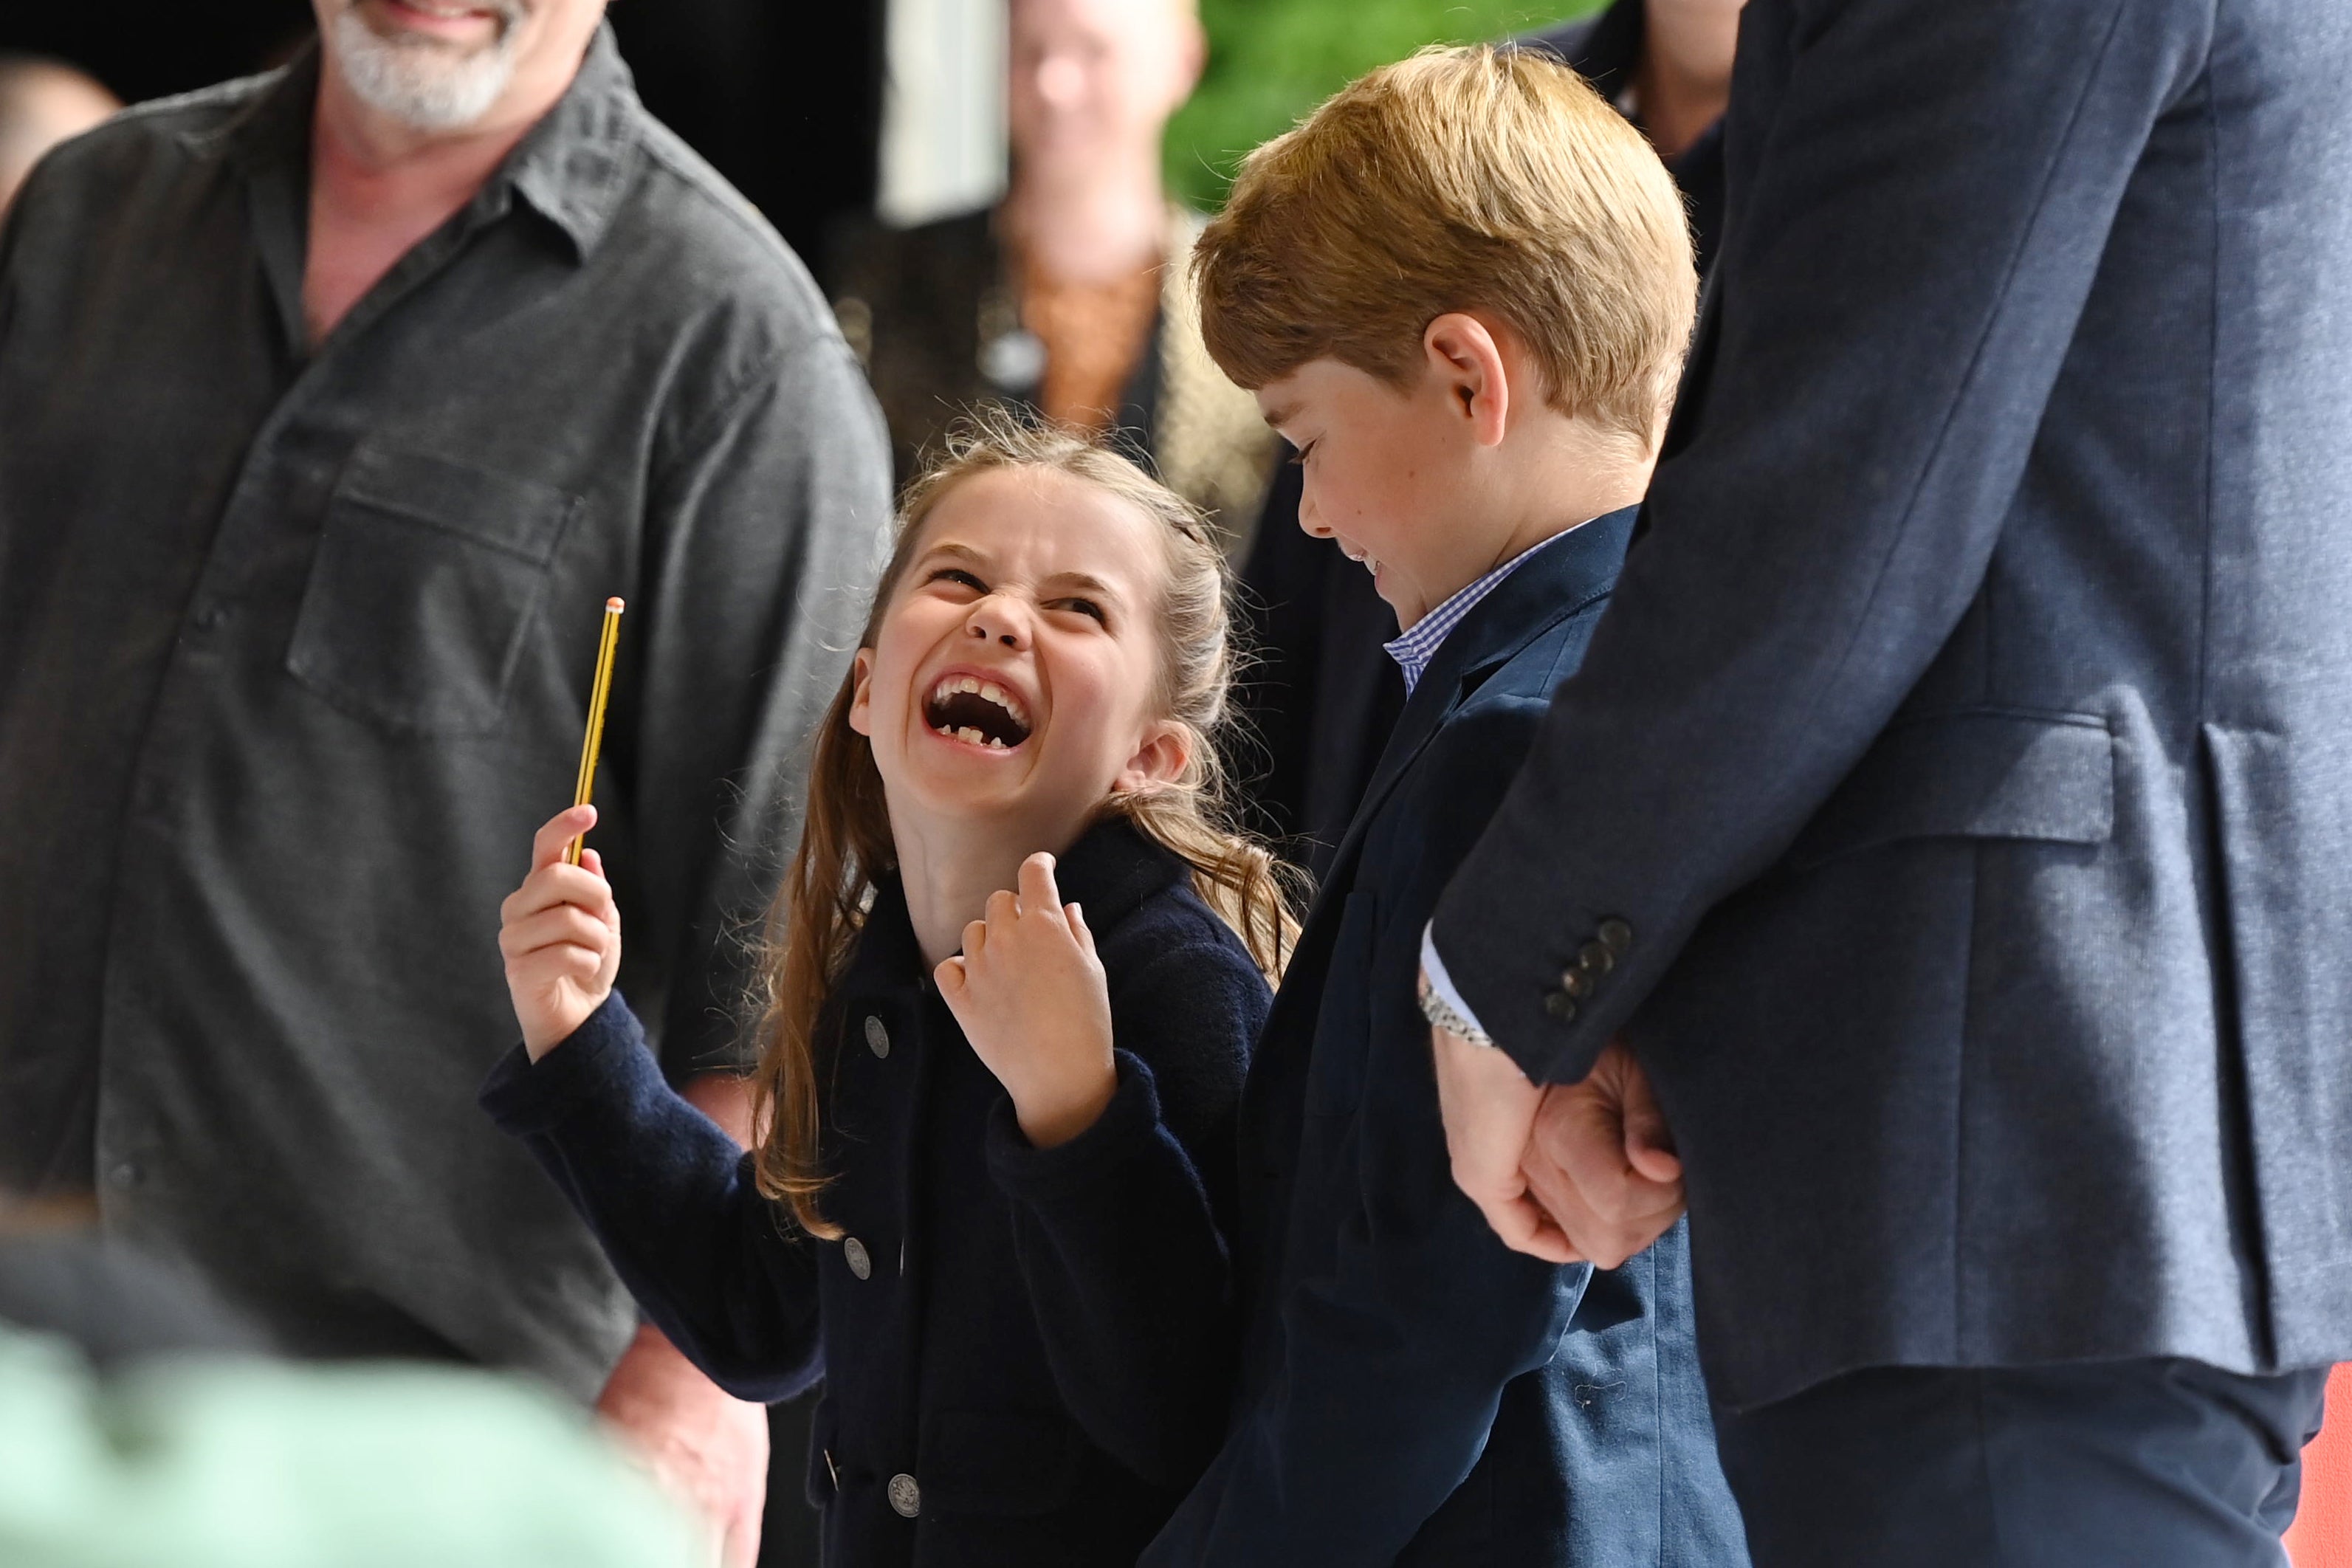 Princess Charlotte laughs as she conducts a band next to her brother, Prince George, during their visit to Cardiff Castle (Ashley Crowden/PA)